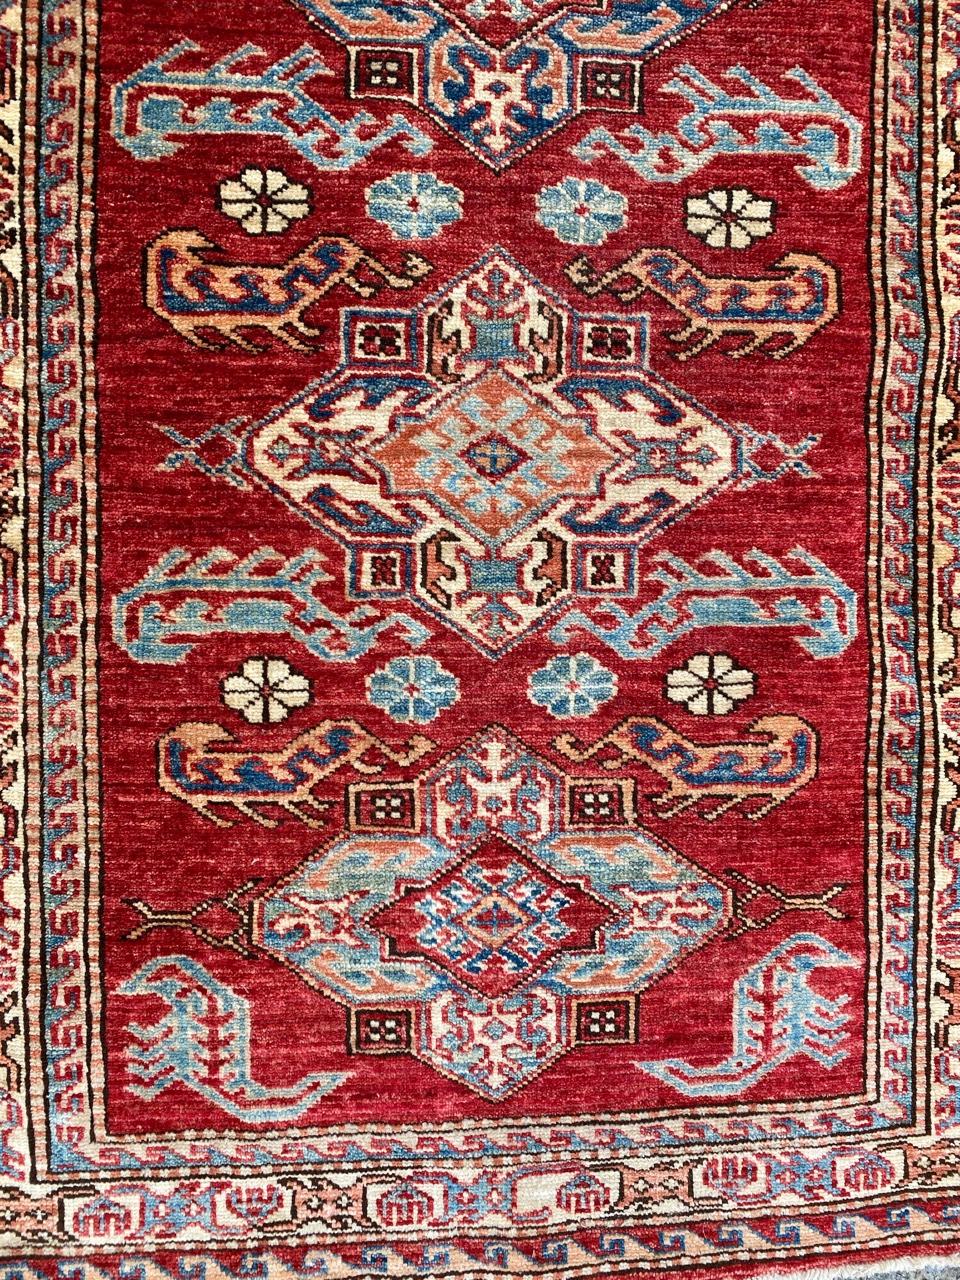 Very nice new Afghan rug with a beautiful Kazak design and nice colors with red, blue and orange, entirely hand knotted with wool velvet on cotton foundation.

✨✨✨
